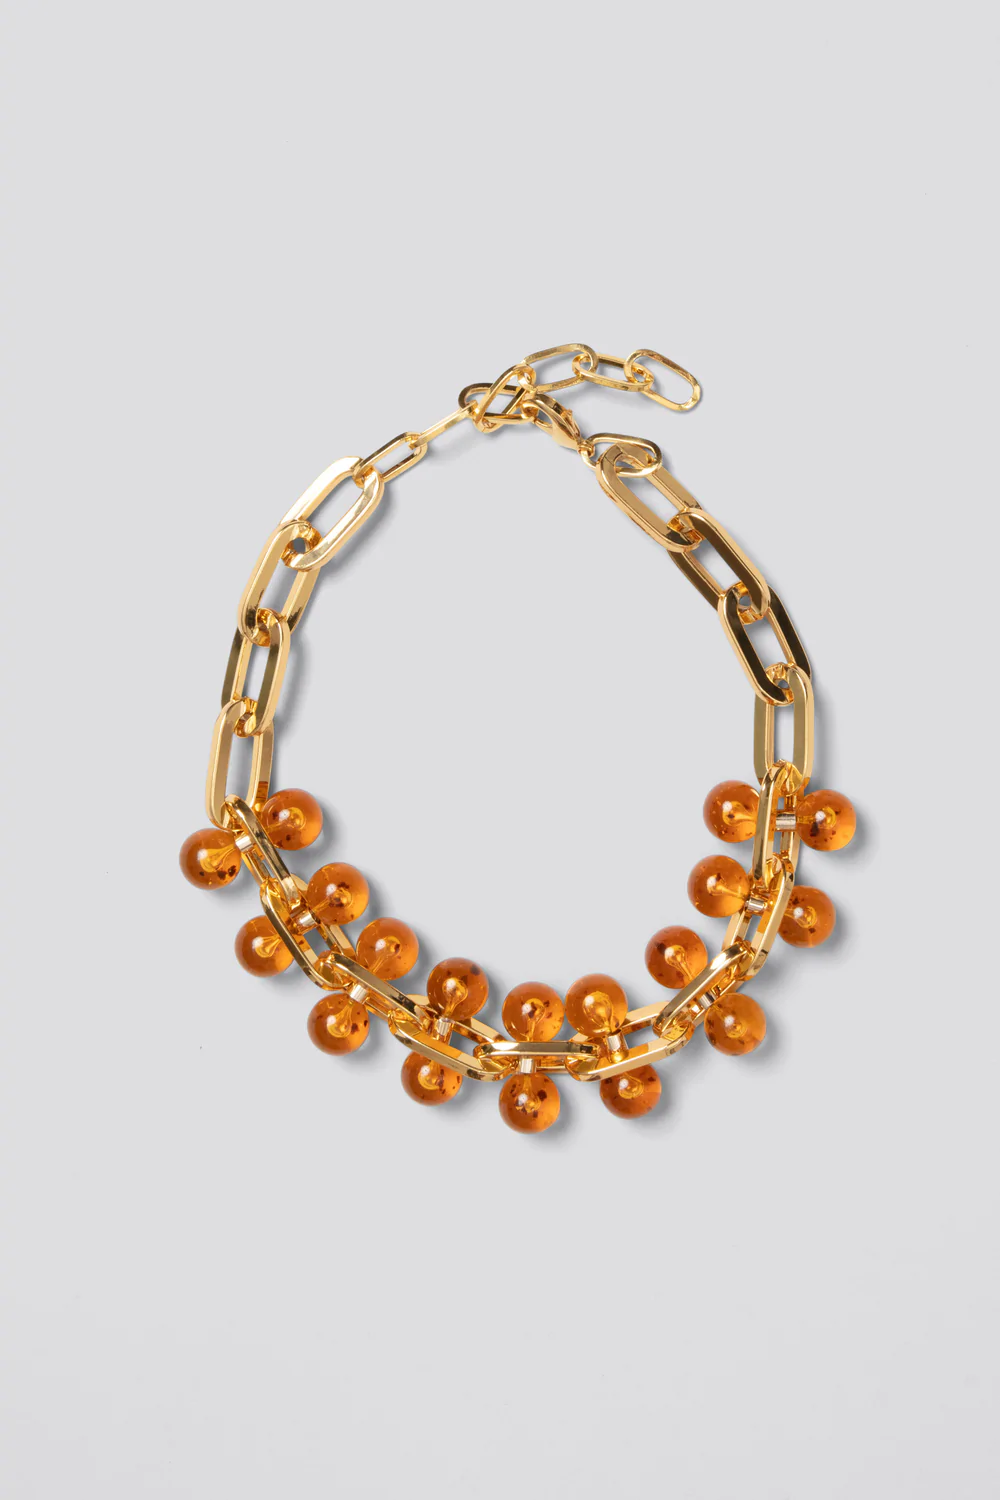 Product Image for Inti Necklace, Amber